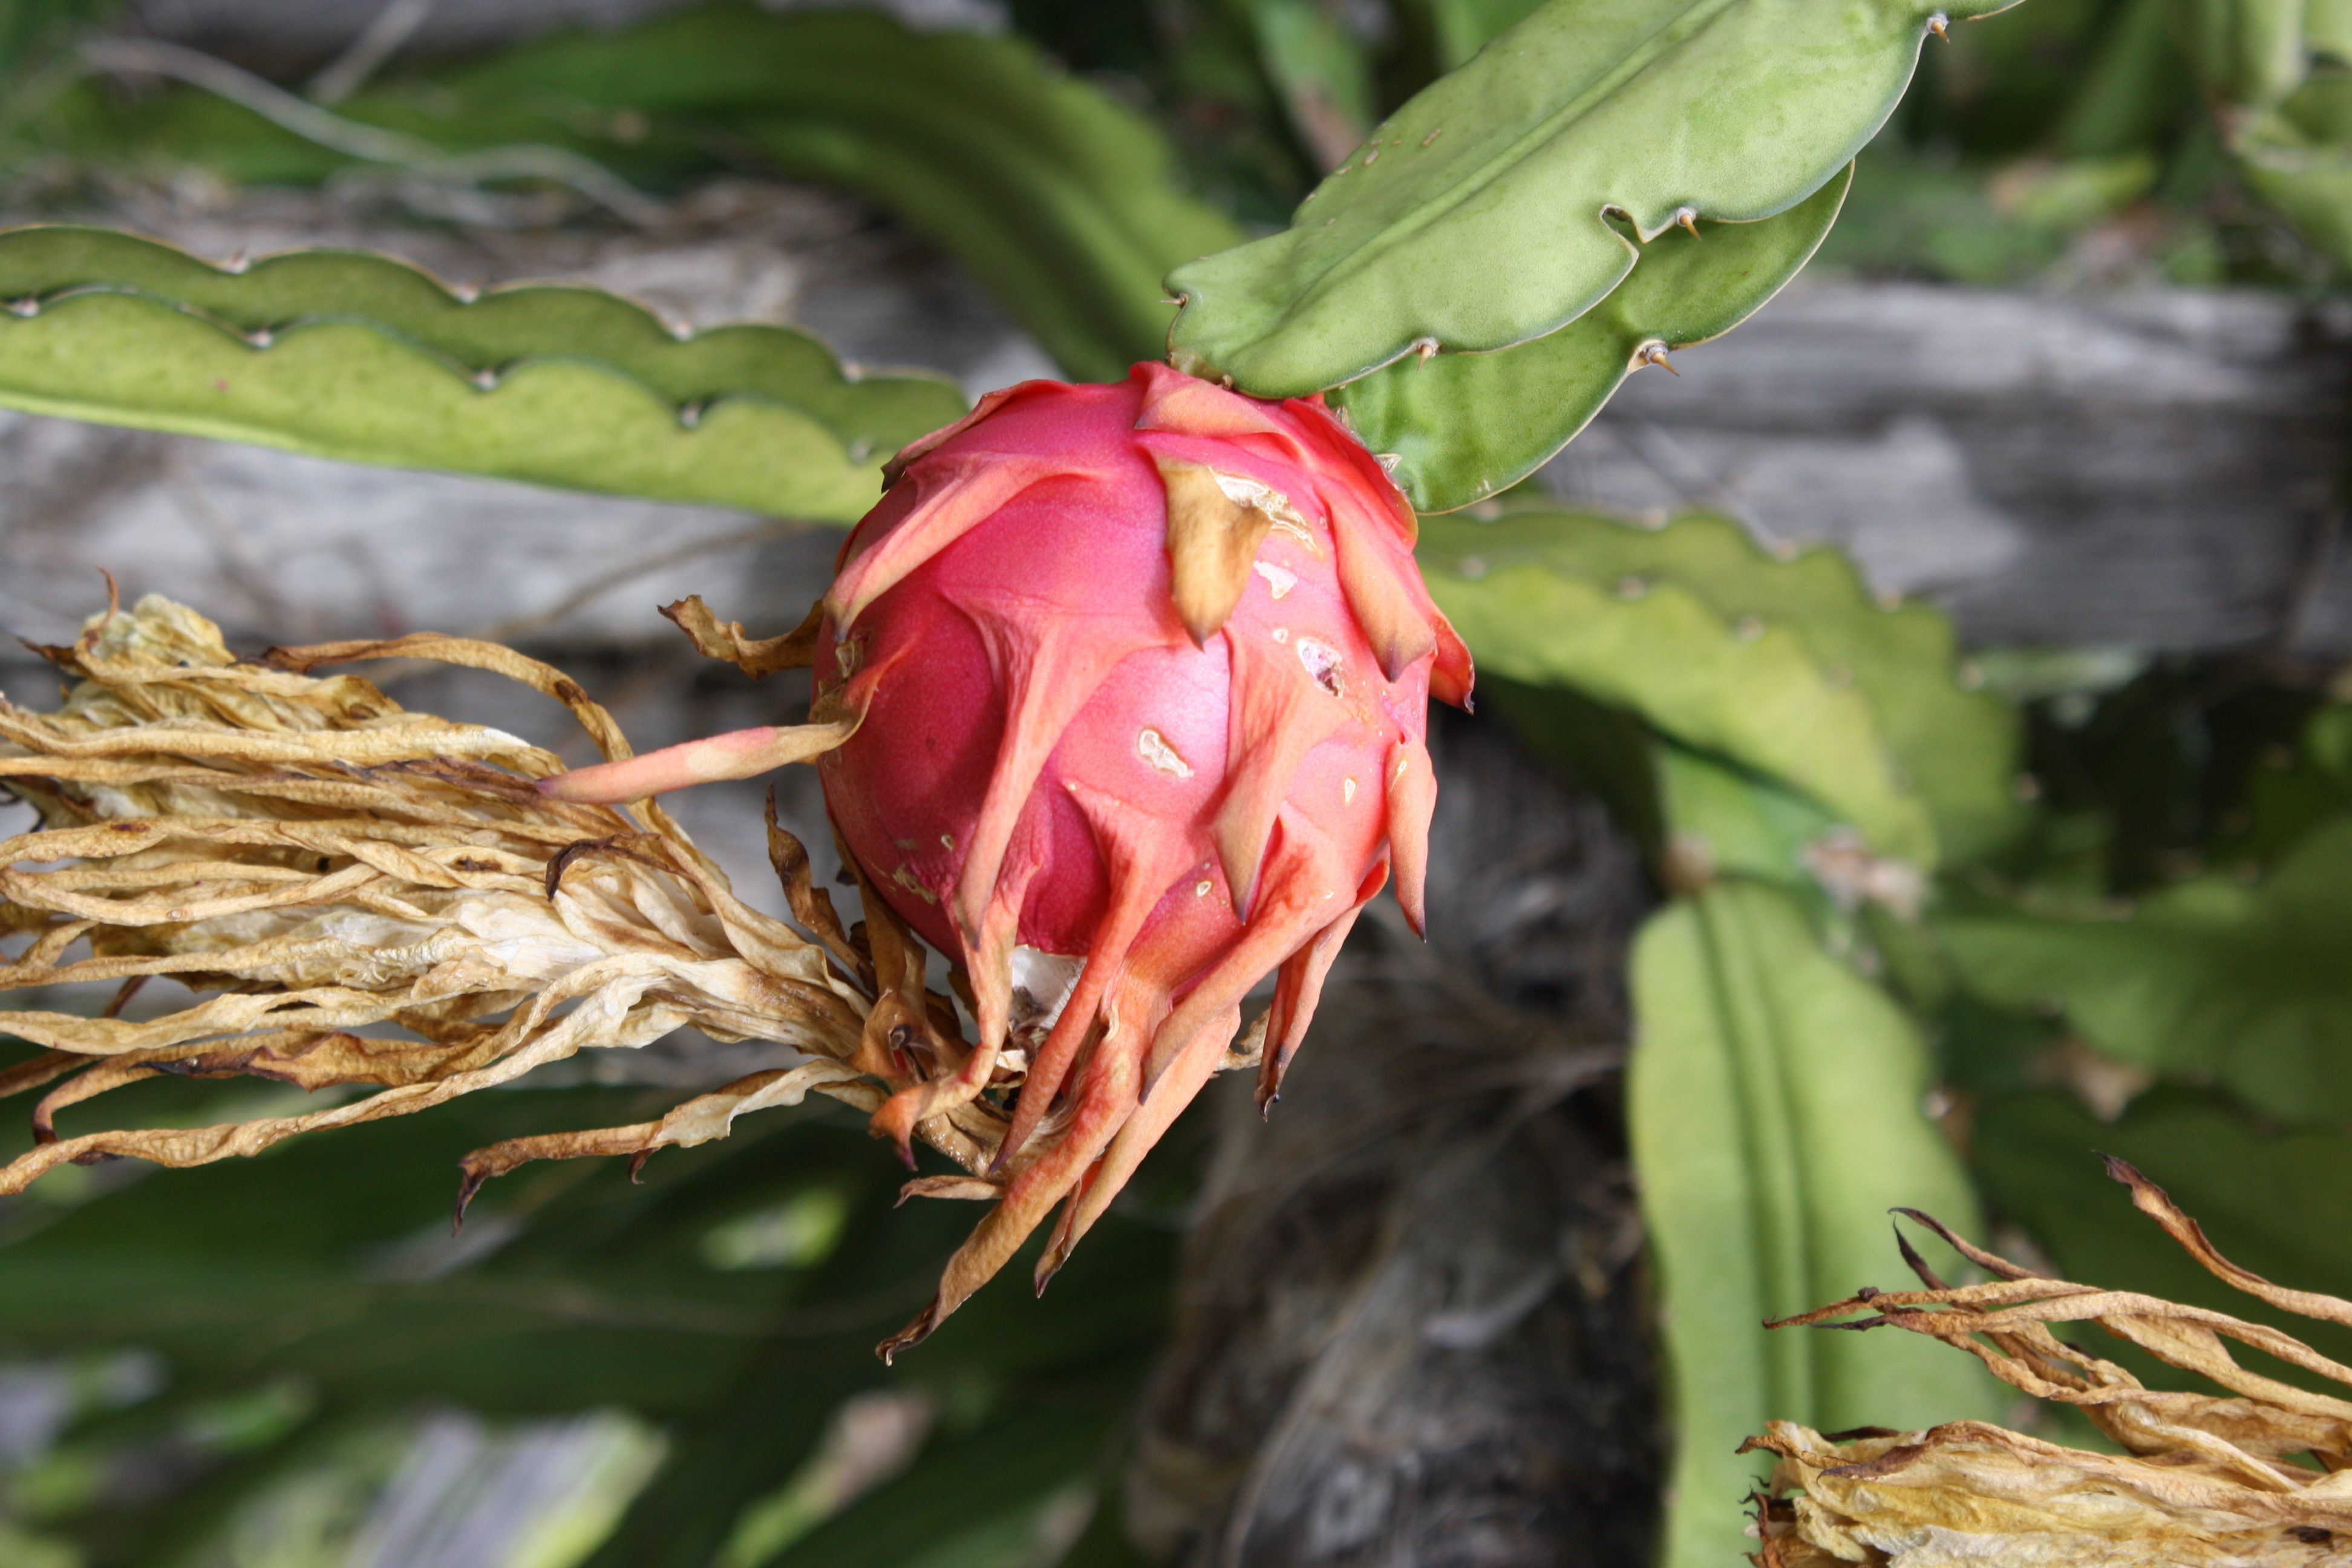 This campus is edible: dragon fruit